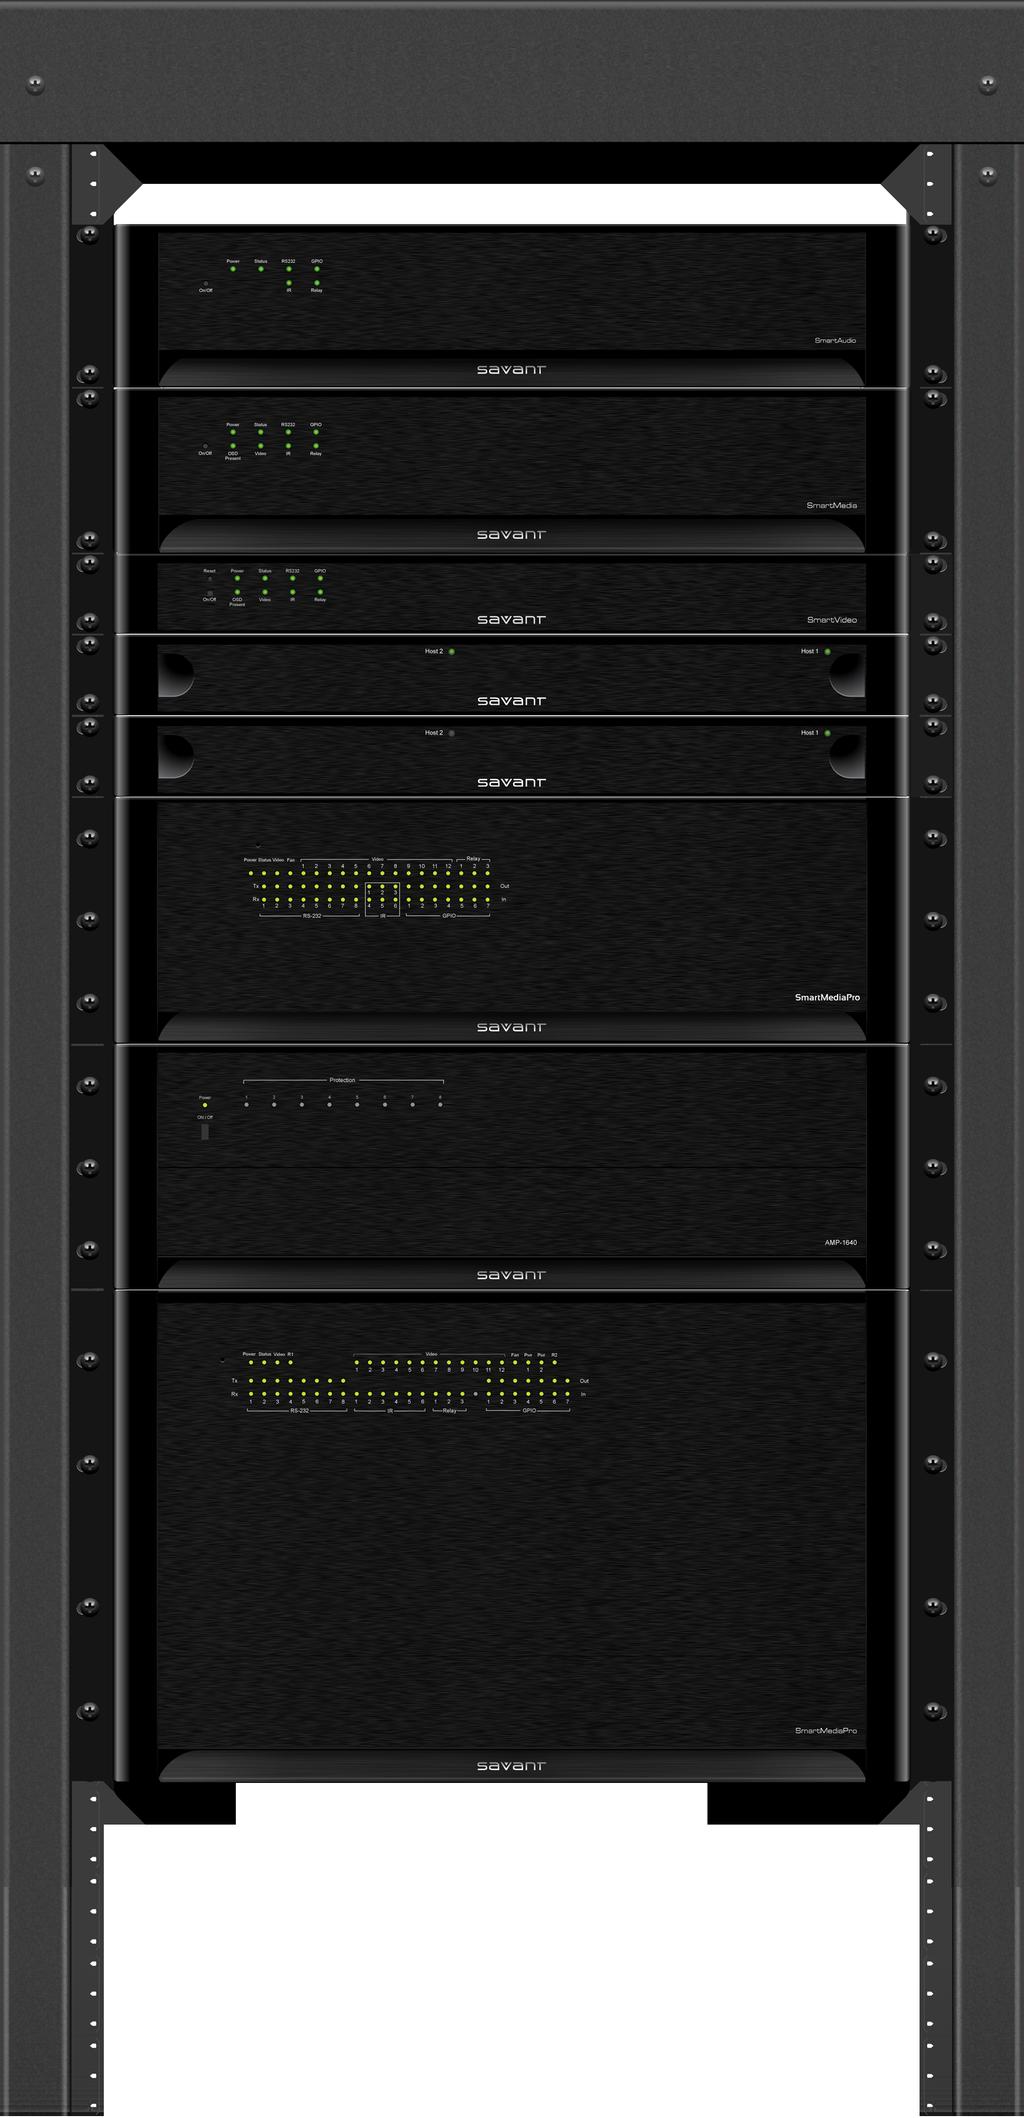 Specifications for Installing Device in Rack The SSM-3000 can be mounted in a 2U rack style enclosure.